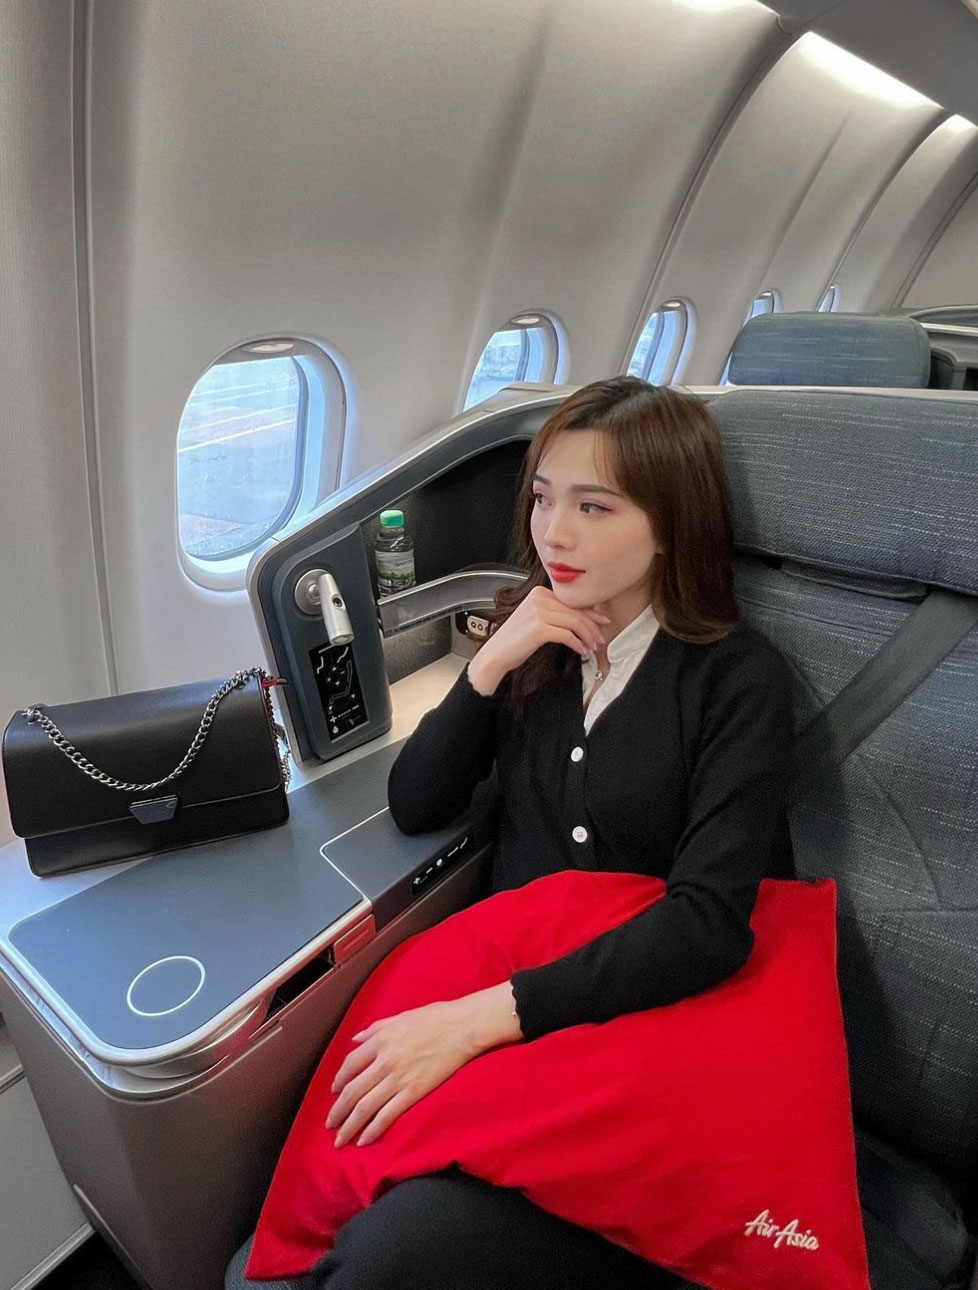 Queen of media and social networks: what the most beautiful stewardess in the world looks like now